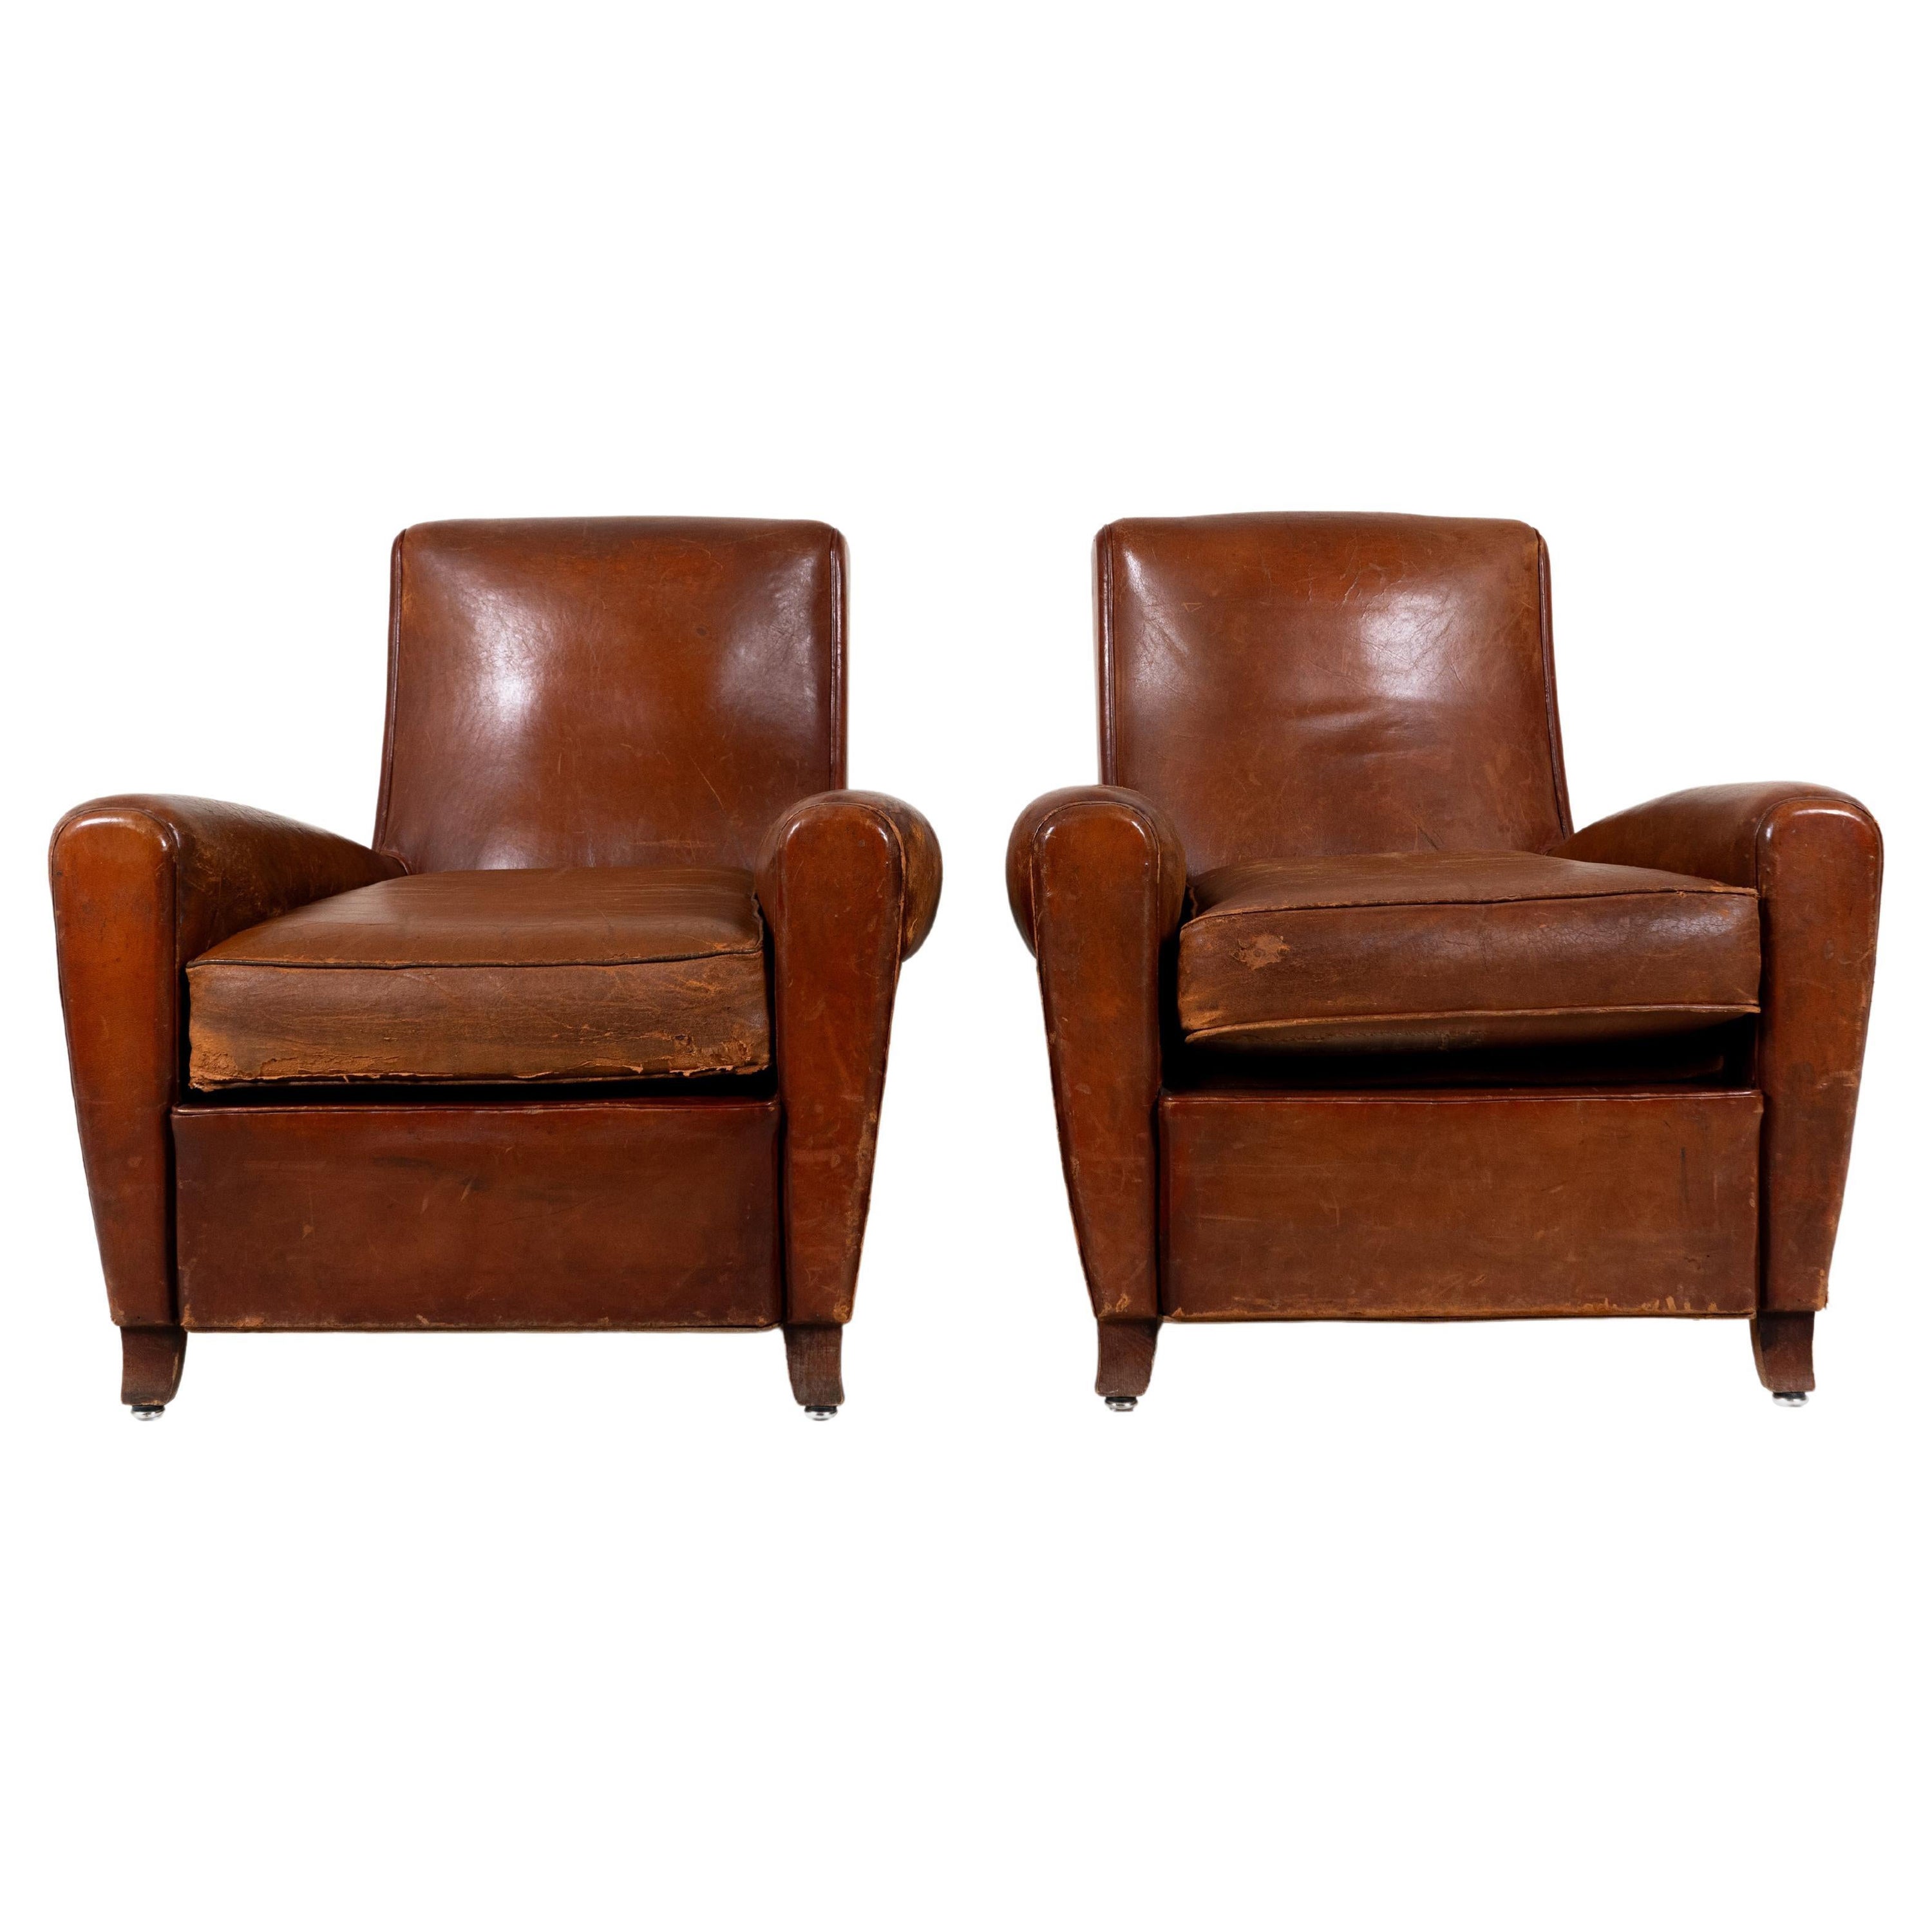 A Pair of French Leather Chairs, c. 1950 For Sale